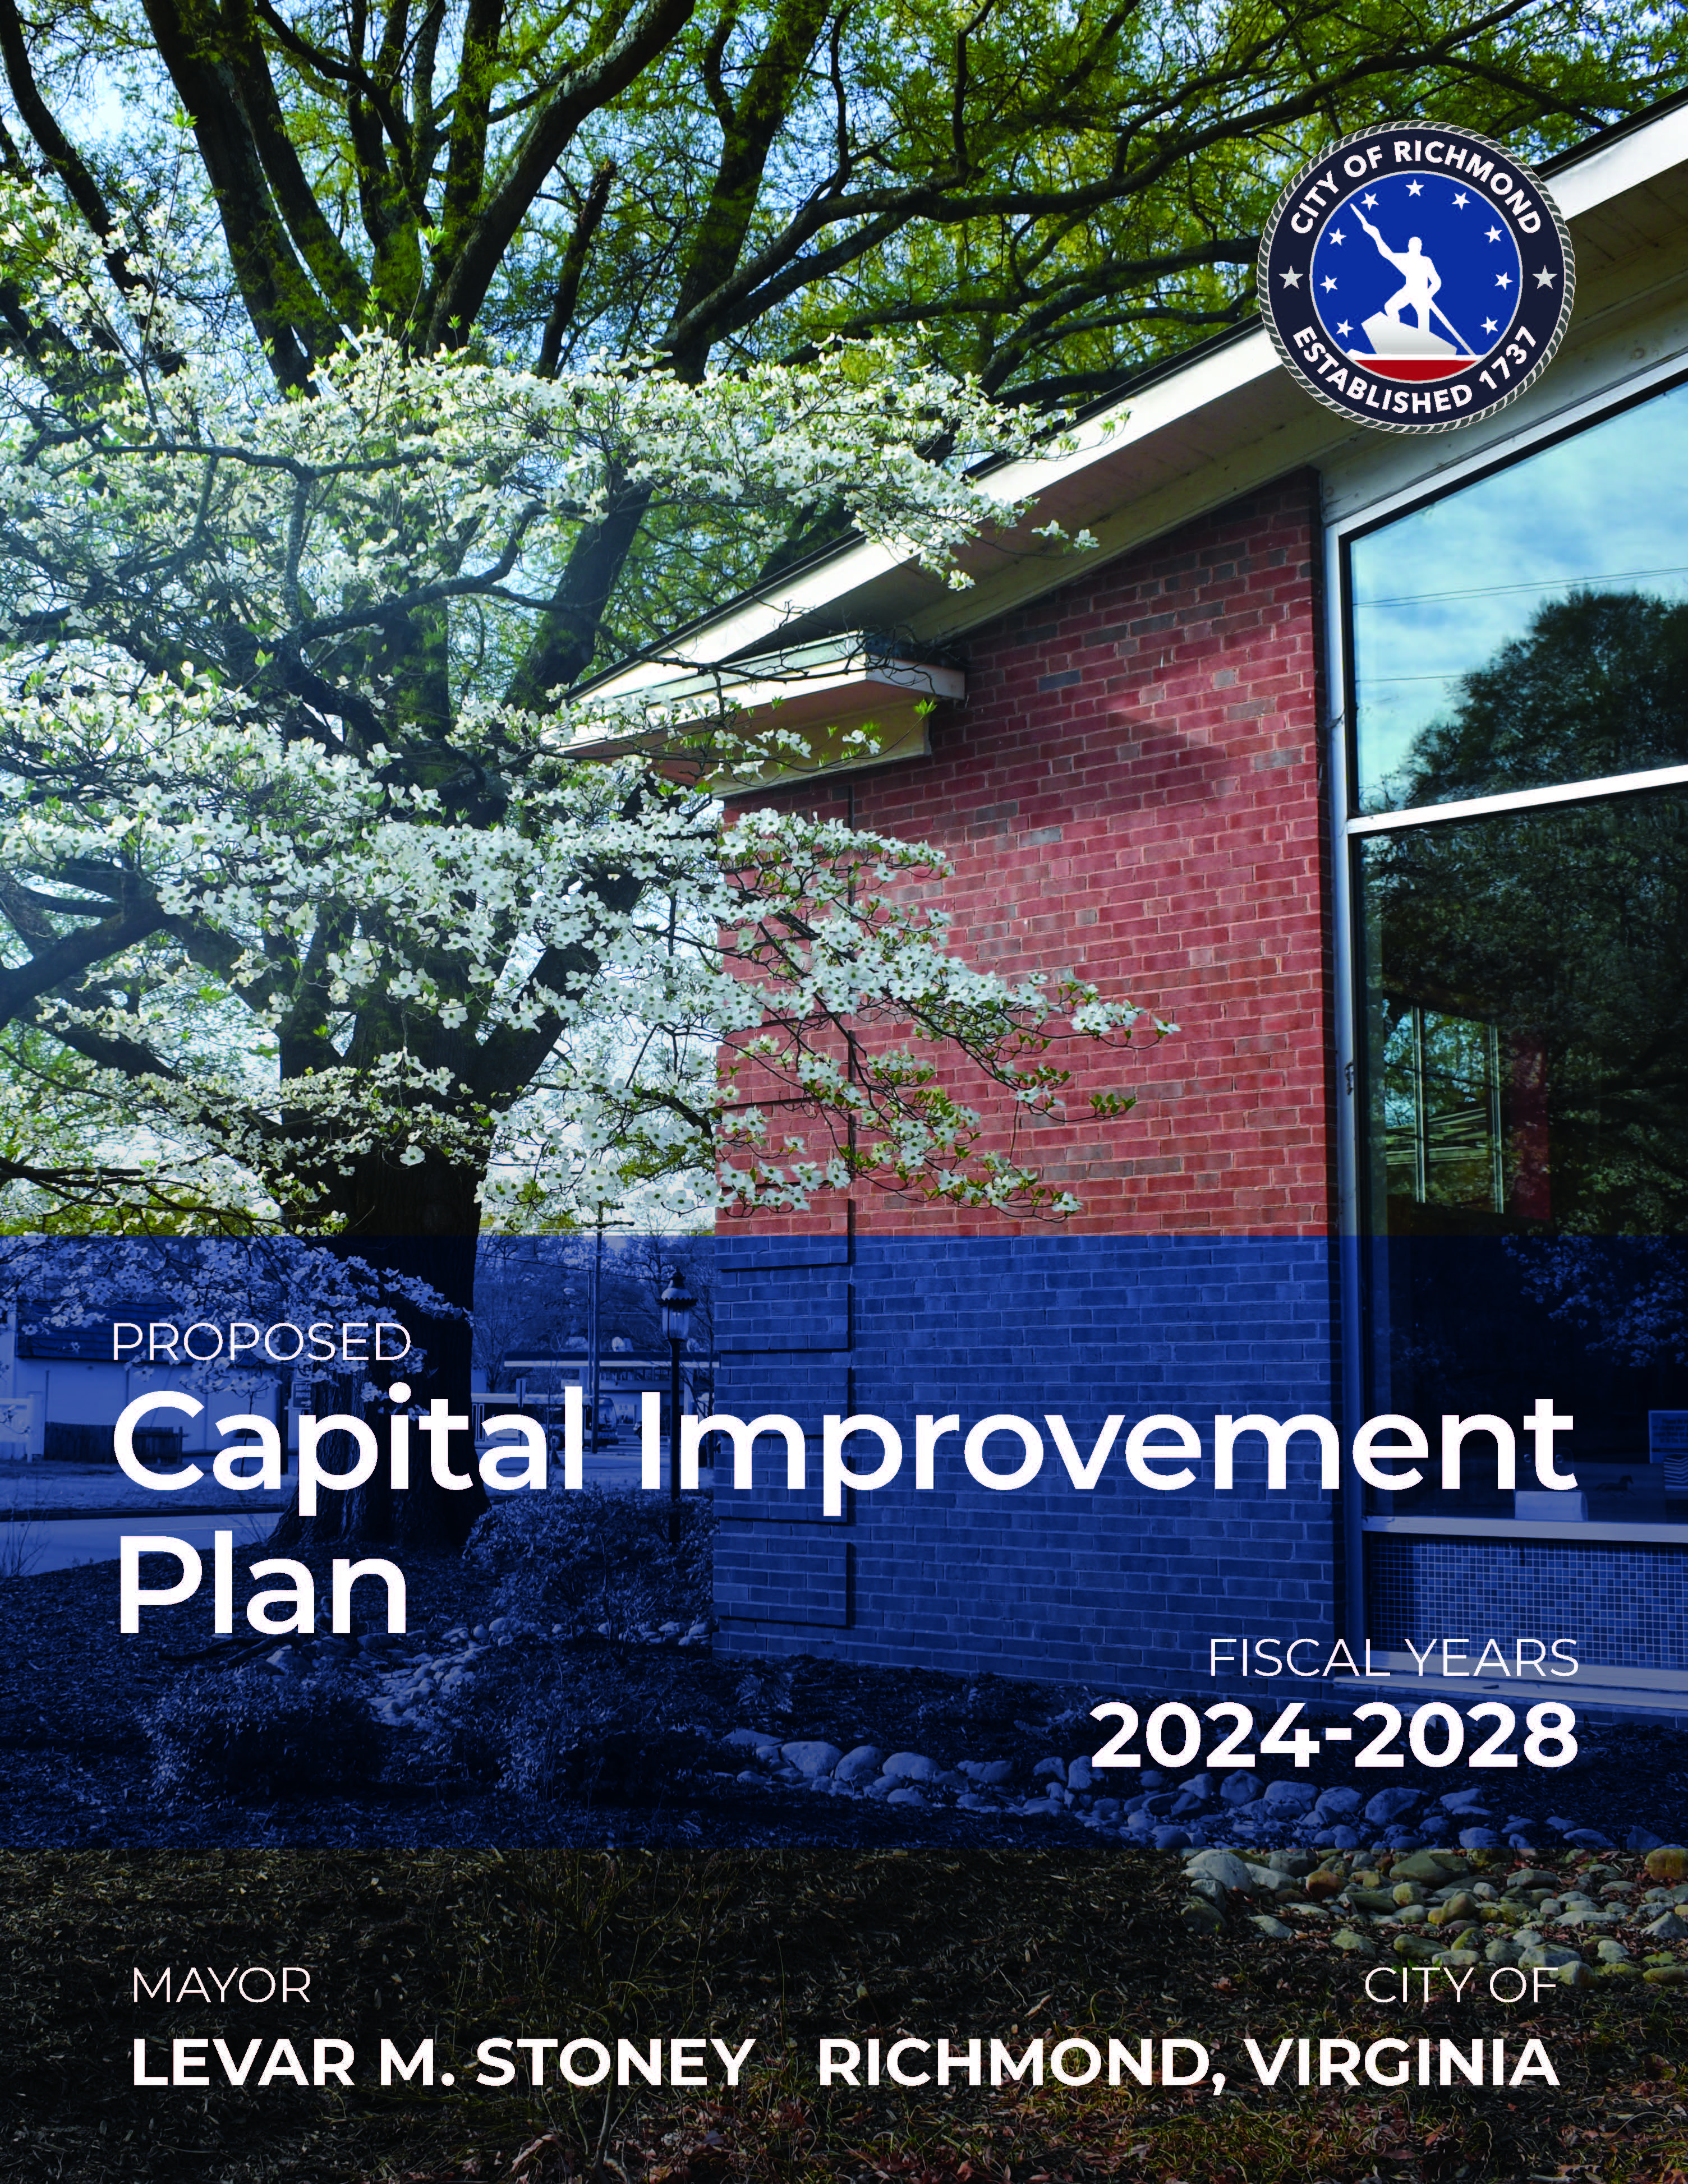 Adopted Capital Improvement Plan for Fiscal Years 2022-2026